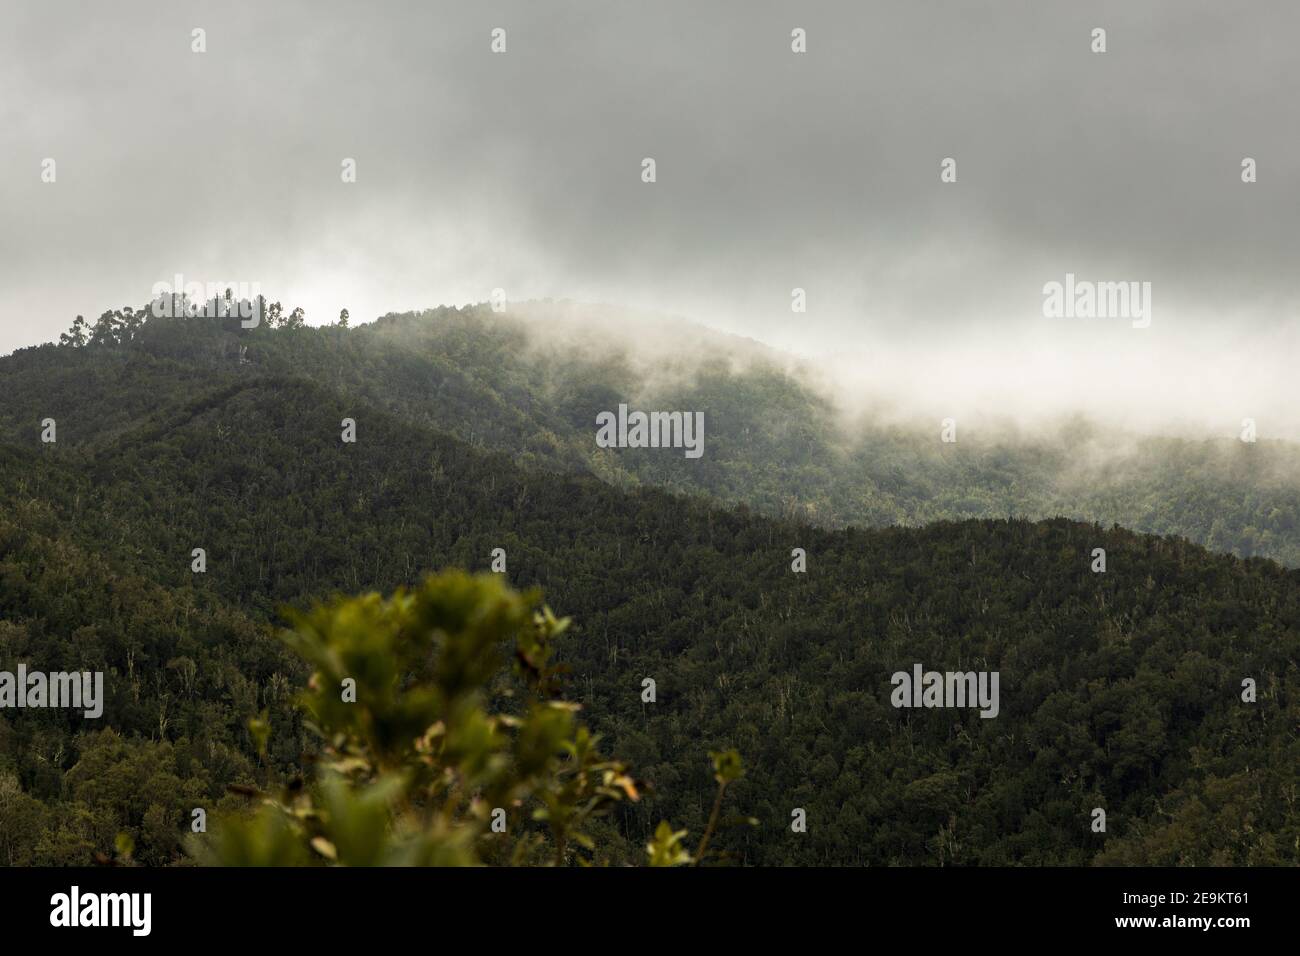 Misty day with low cloud over the laurel forests in Monte de Agua, Erjos, teno, Tenerife, Canary Islands, Spain Stock Photo